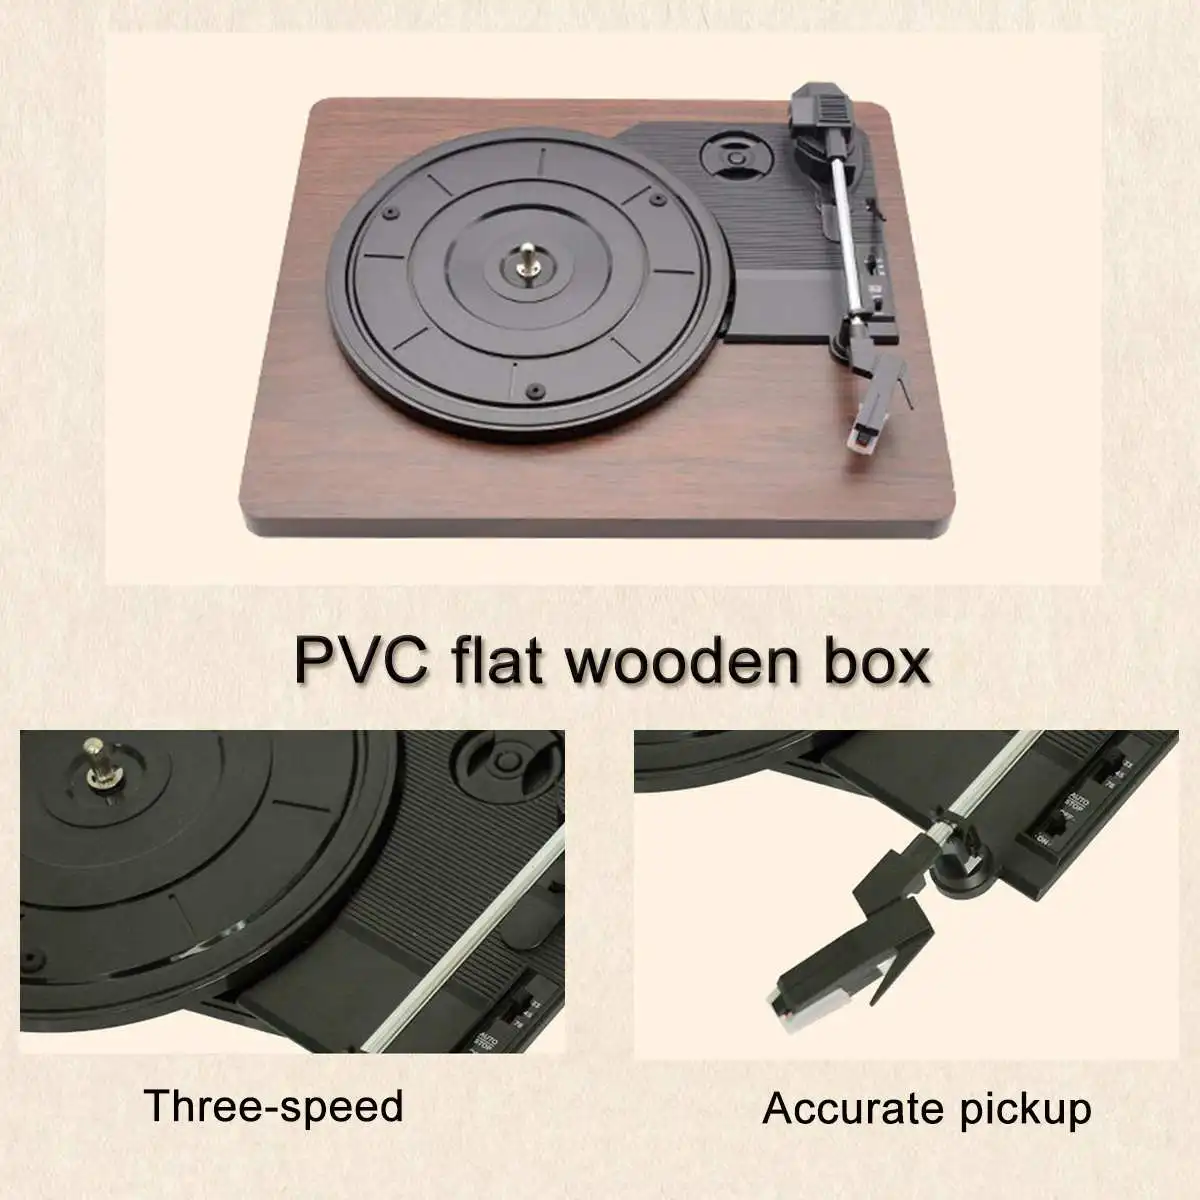 33/45/ 78 RPM Record Player Antique Gramophone Turntable Disc Vinyl Audio PH 2.0 Stereo RCA 3.5mm Output Out USB DC 5V enlarge